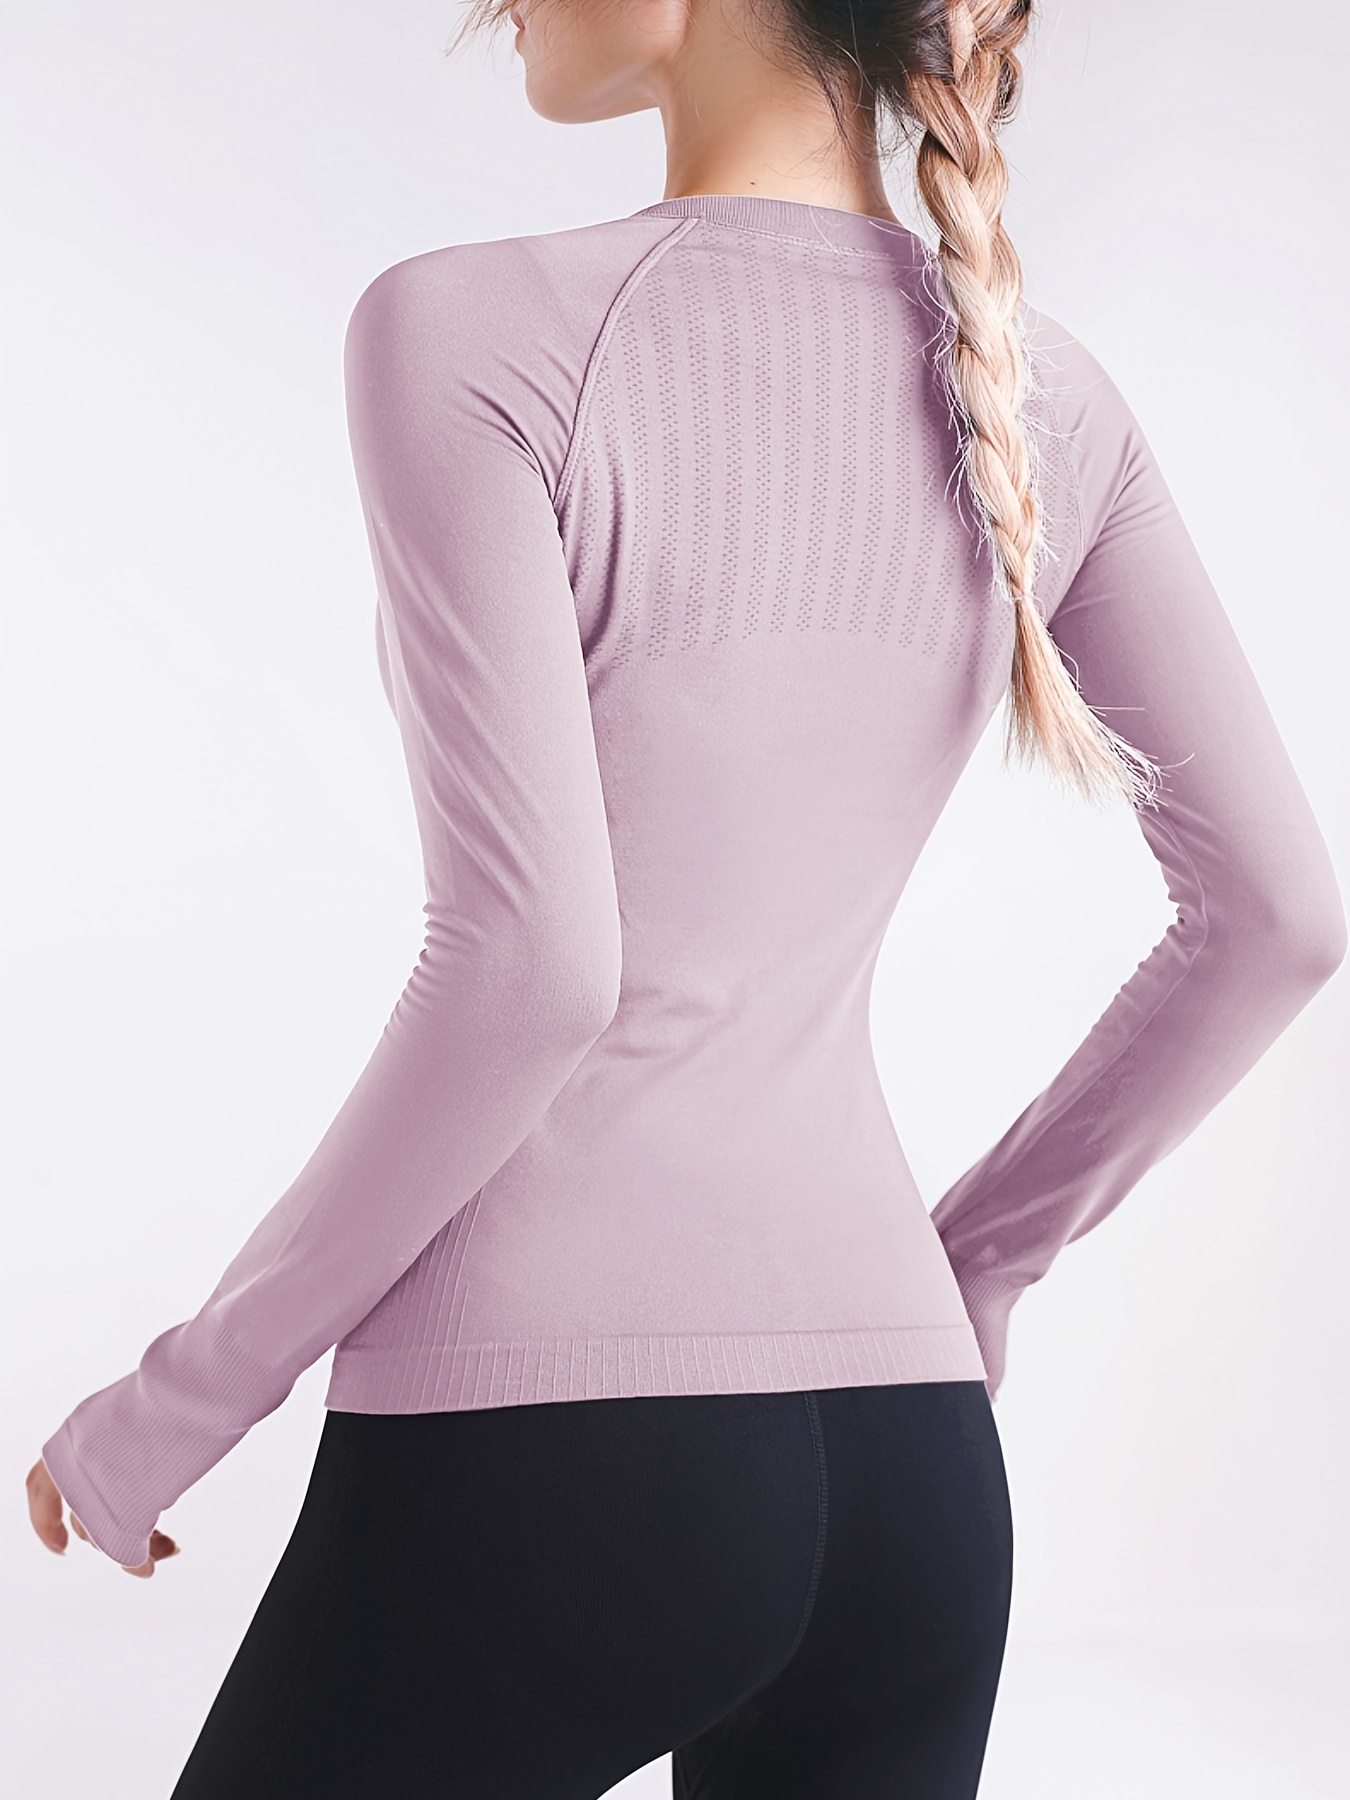 Yoga sports top fitness wear women long sleeve sports top running quick dry  T-shirt tight sexy yoga bottoming shirt